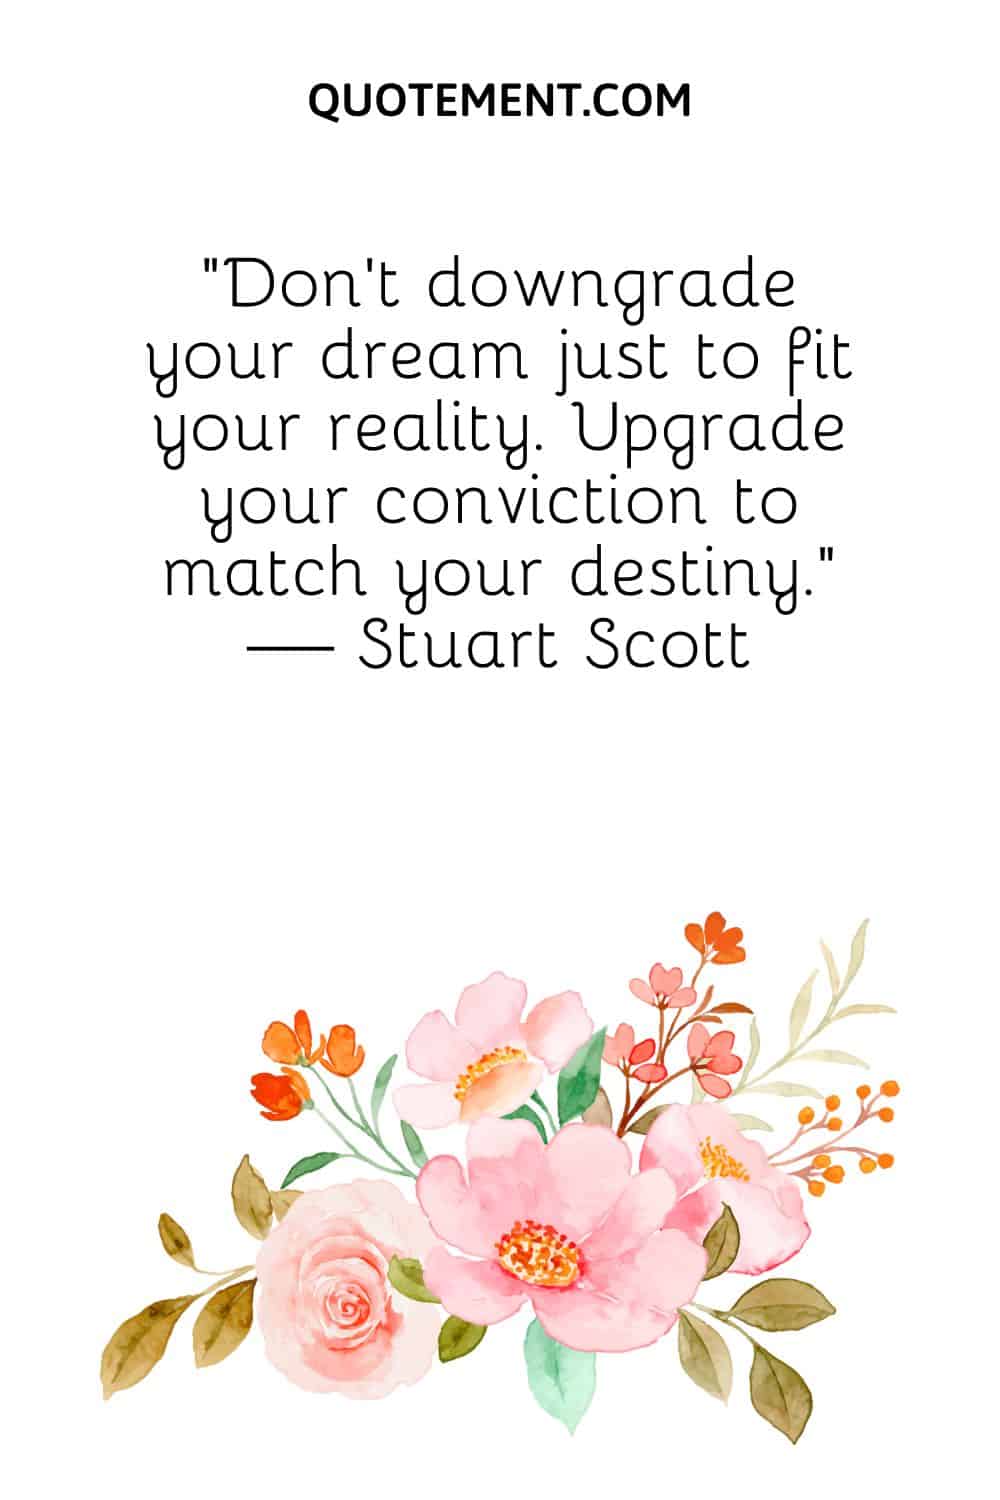 Don’t downgrade your dream just to fit your reality